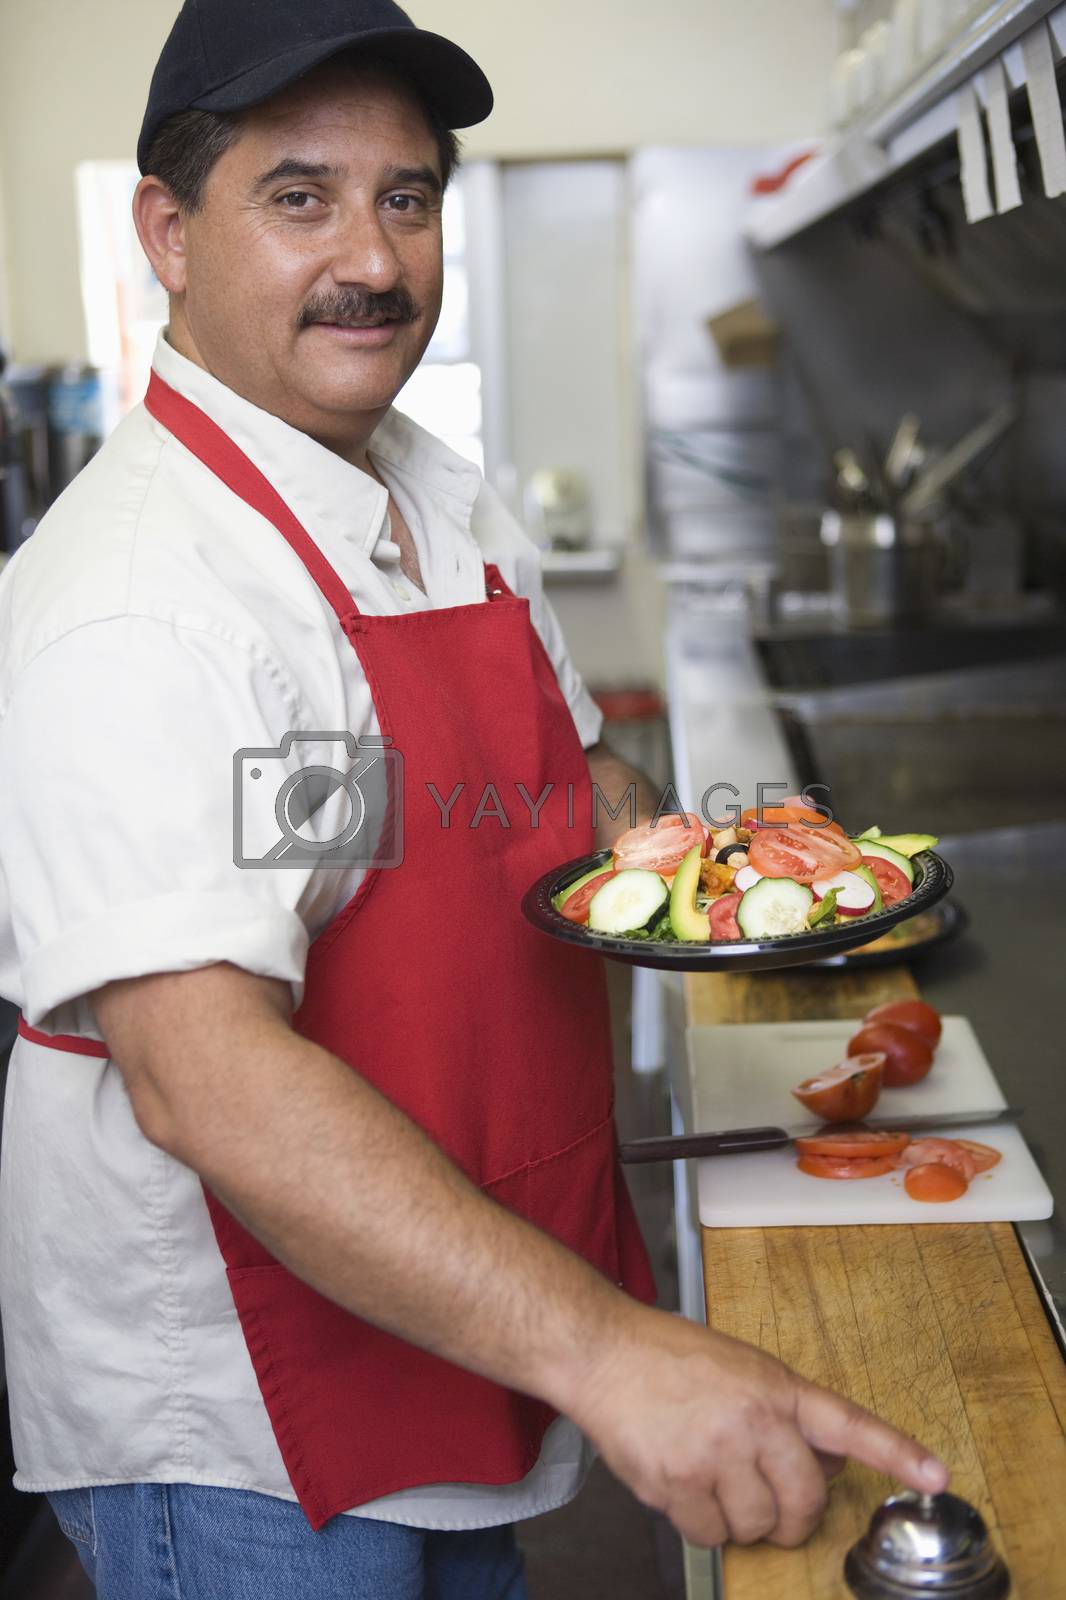 Royalty free image of Portrait of Hispanic Latin man ringing bell with food ready to serve by moodboard